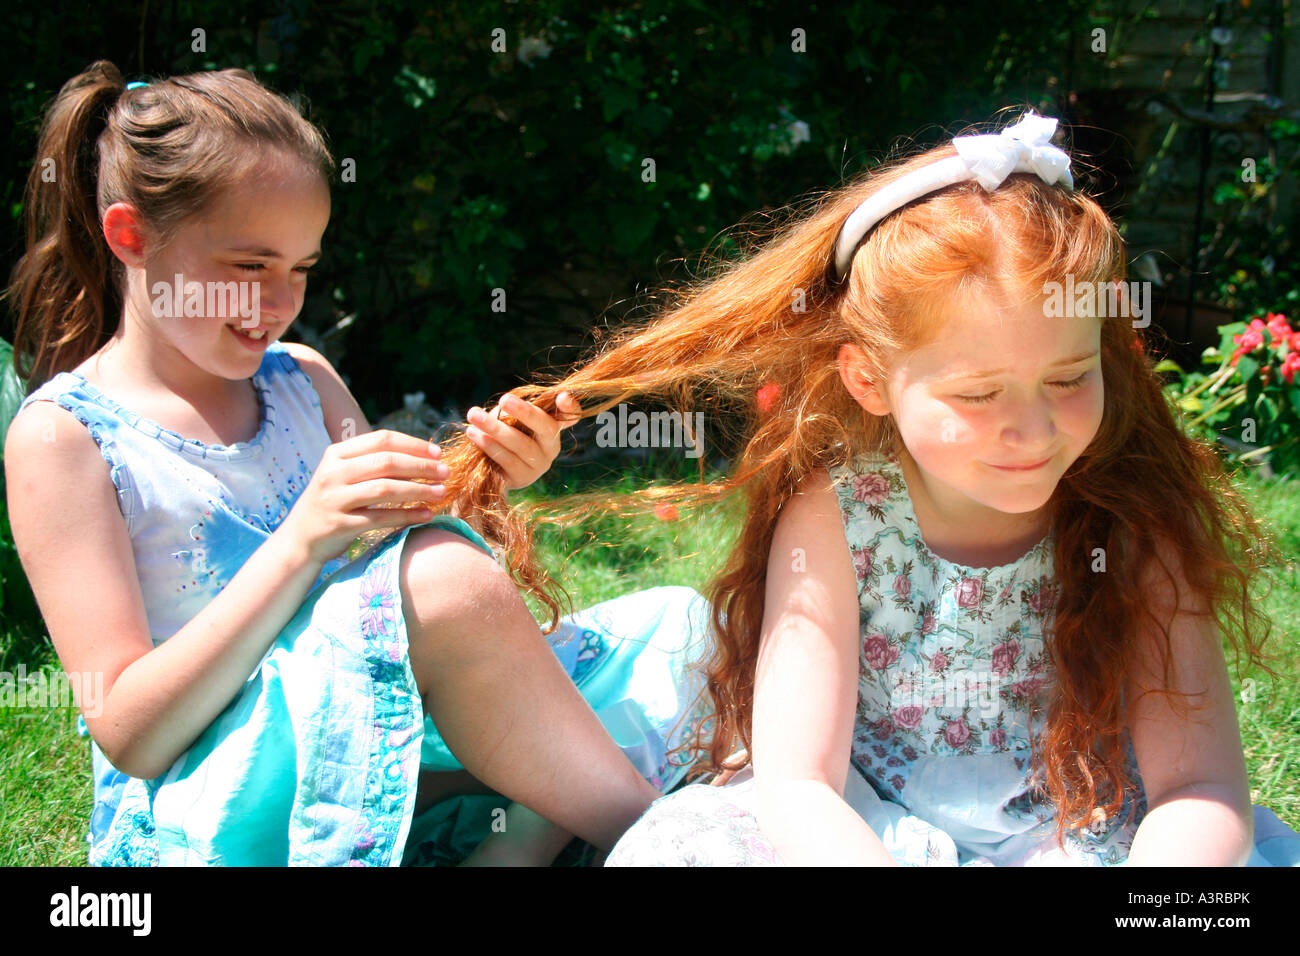 girl plays enviously with hair of redheaded friend Stock Photo